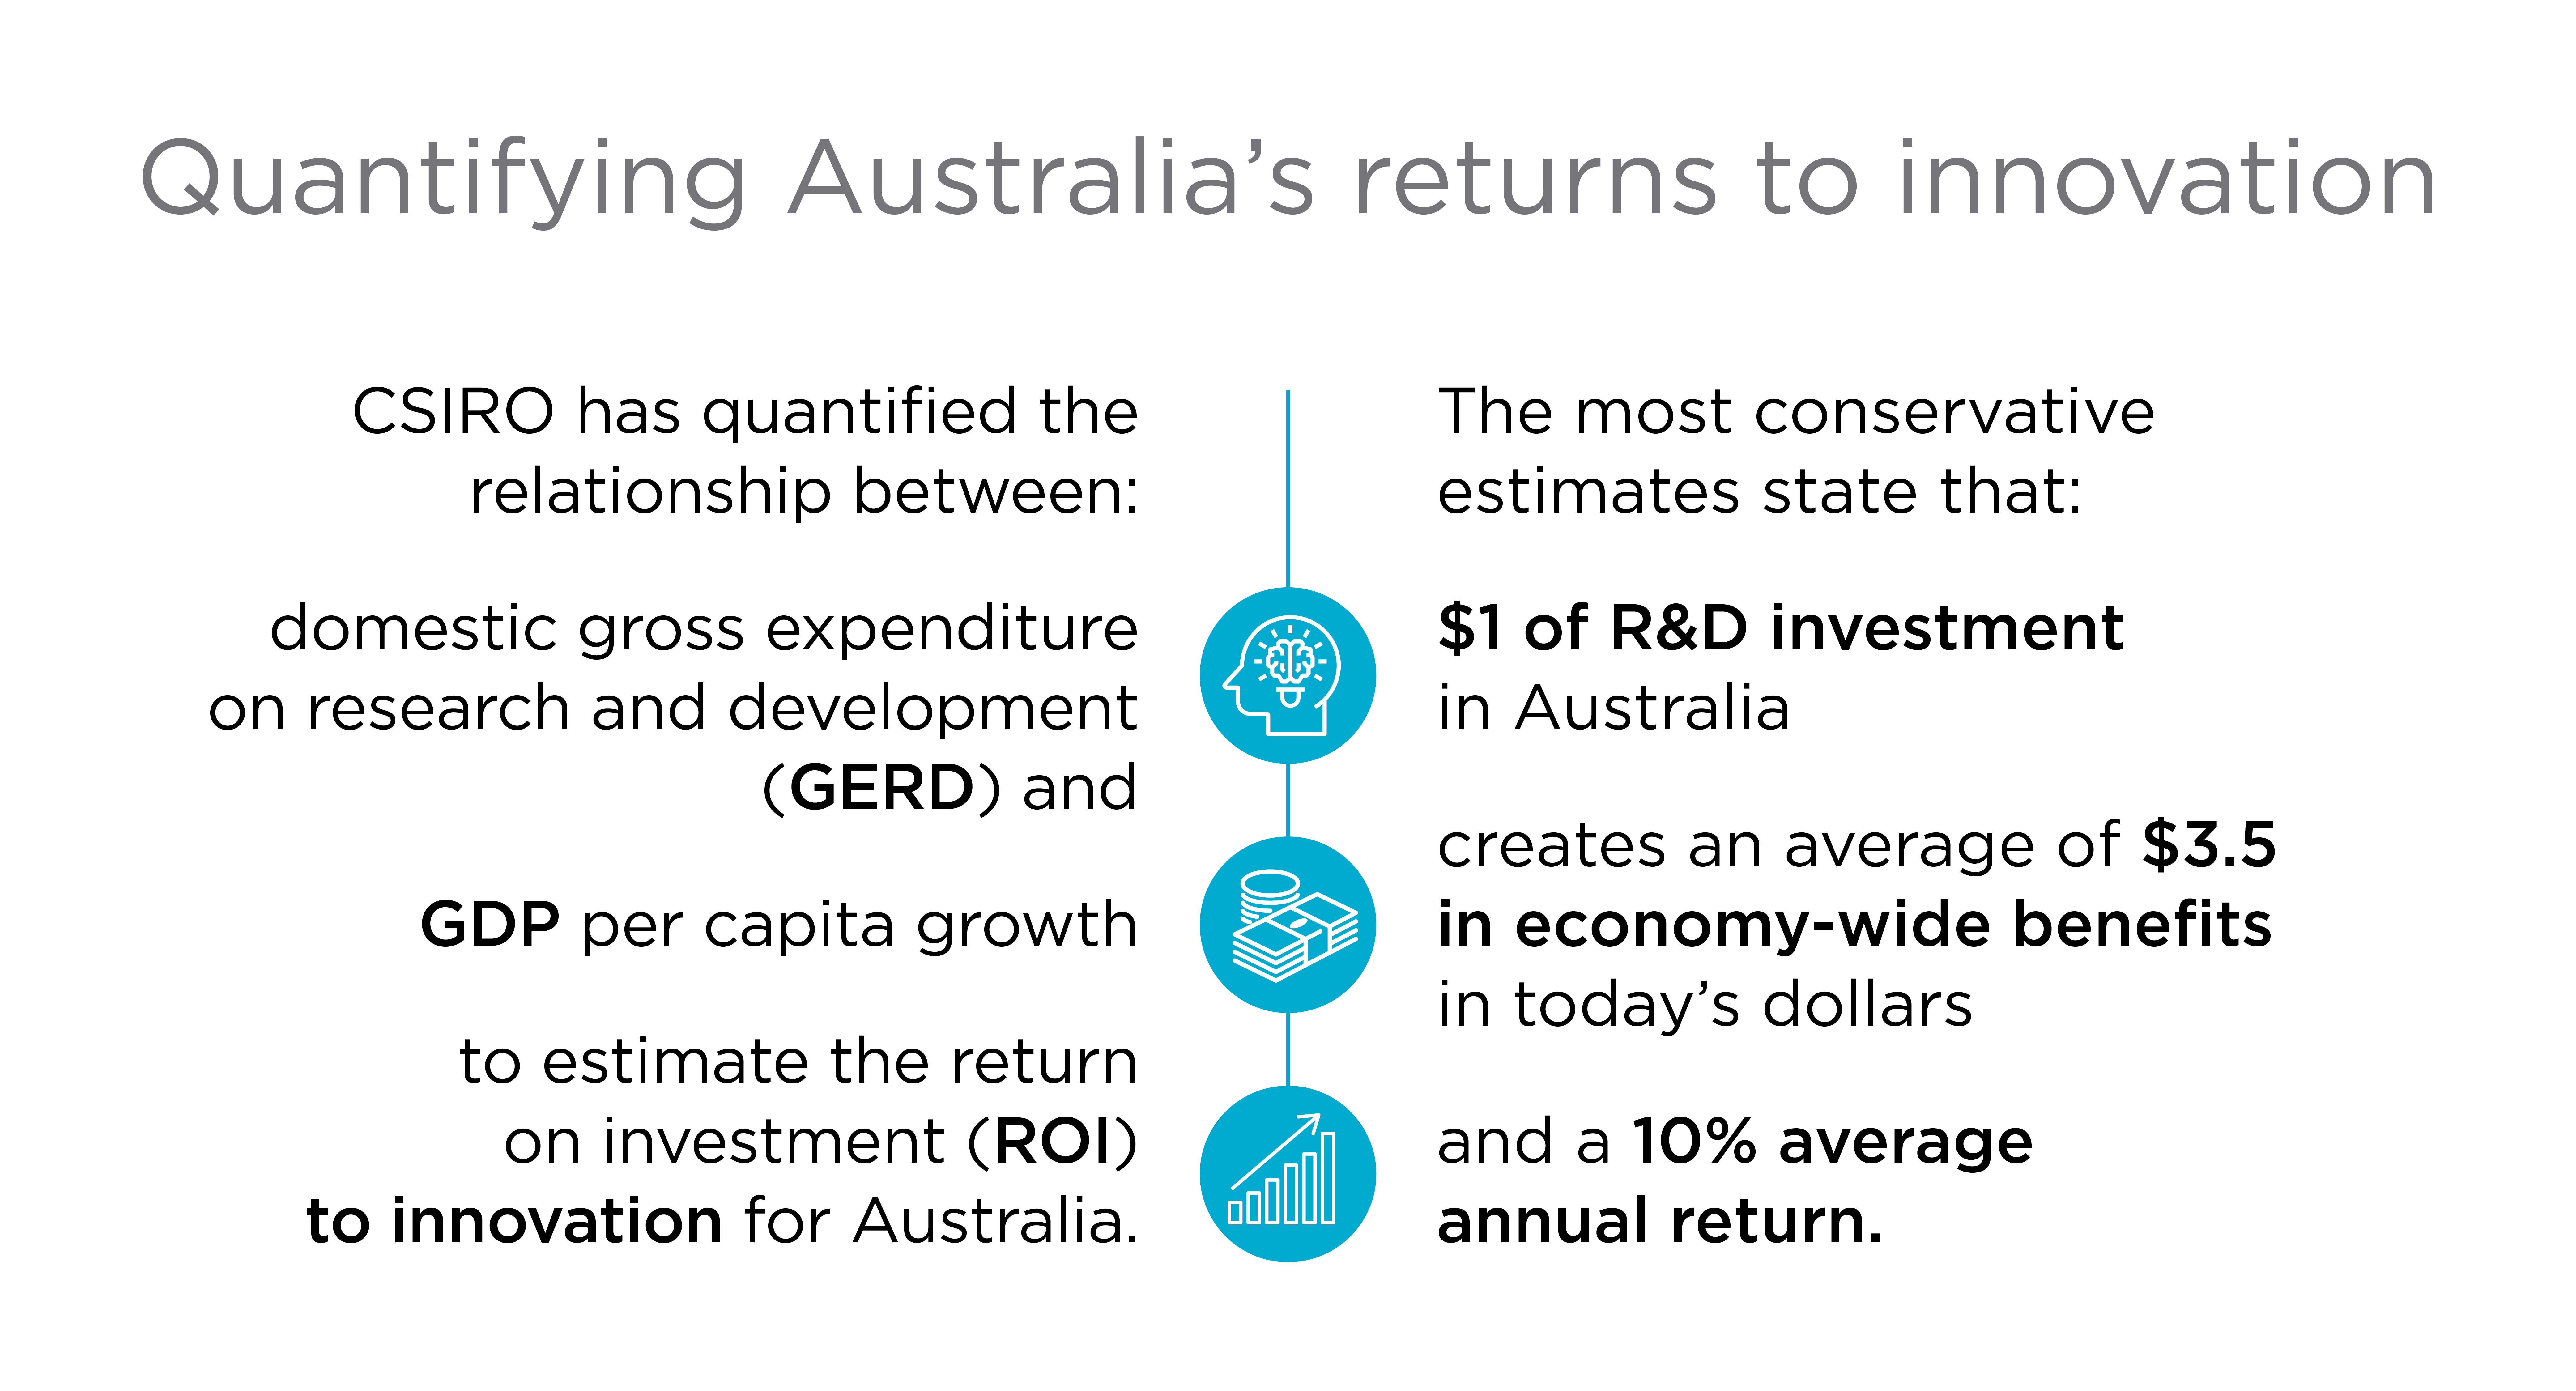 Table showing Australia's returns to innovation.